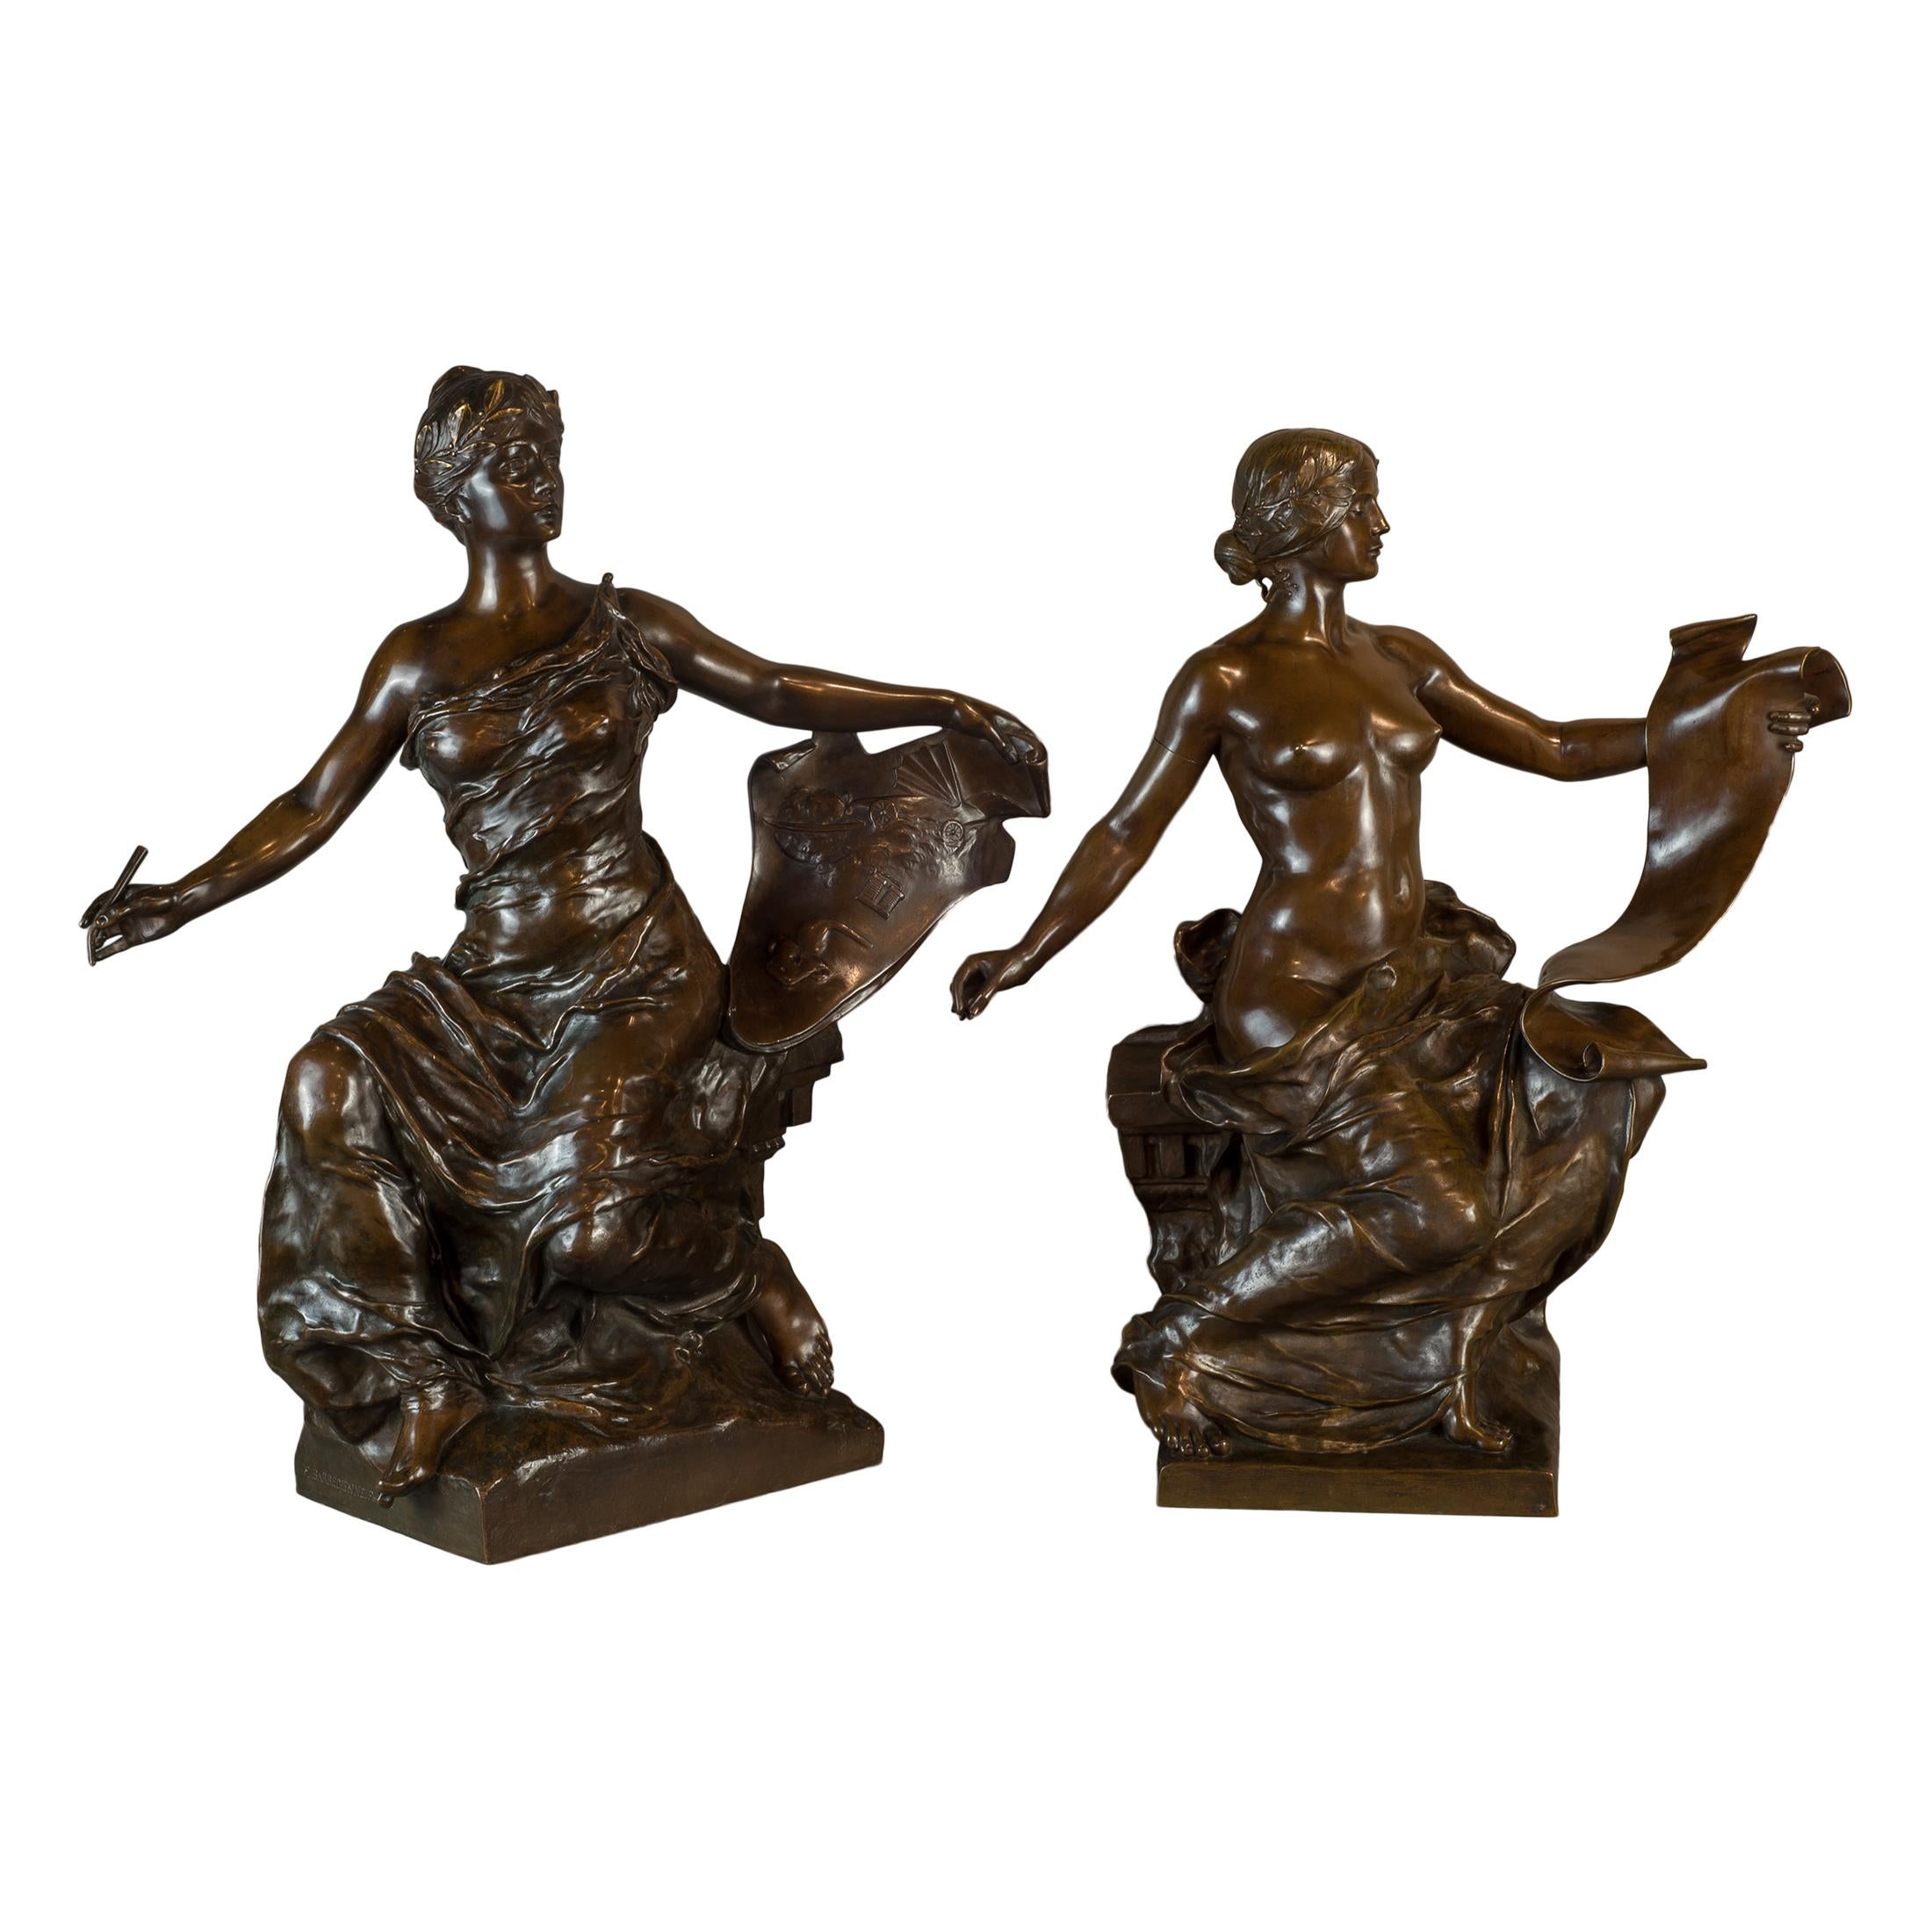 George Bareau Figurative Sculpture - Fine Pair of Patinated Bronze Females by Georges Bareau and Barbedienne Foundry